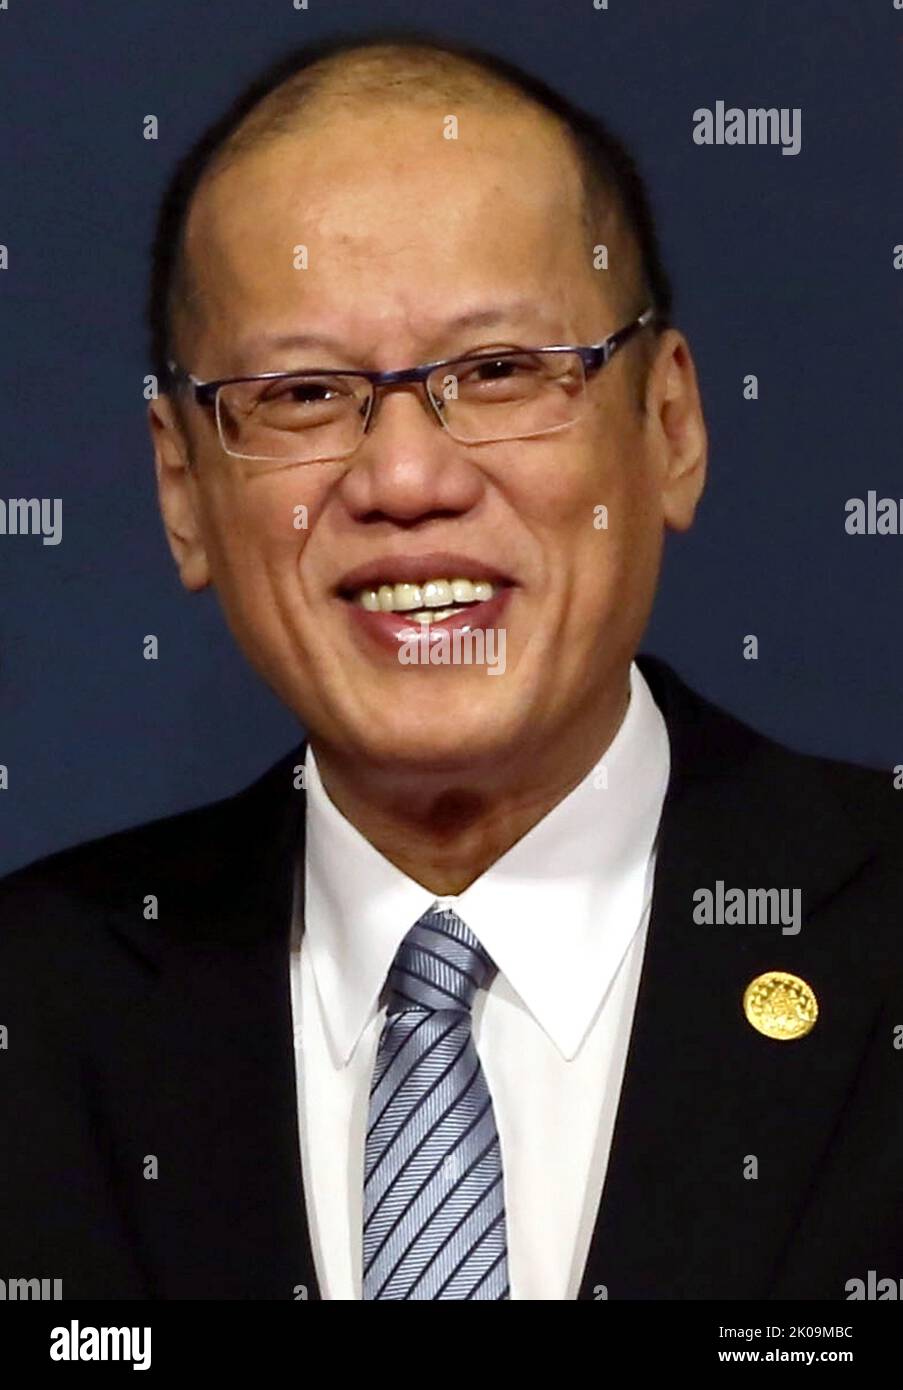 Benigno Aquino III (1960 - 2021), known as Noynoy Aquino. Filipino politician who served as the 15th president of the Philippines from 2010 to 2016. Before being elected president, Aquino was a member of the House of Representatives and Senate from 1998 to 2010, and also served as a deputy speaker of the House of Representatives from 2004 to 2006. Stock Photo